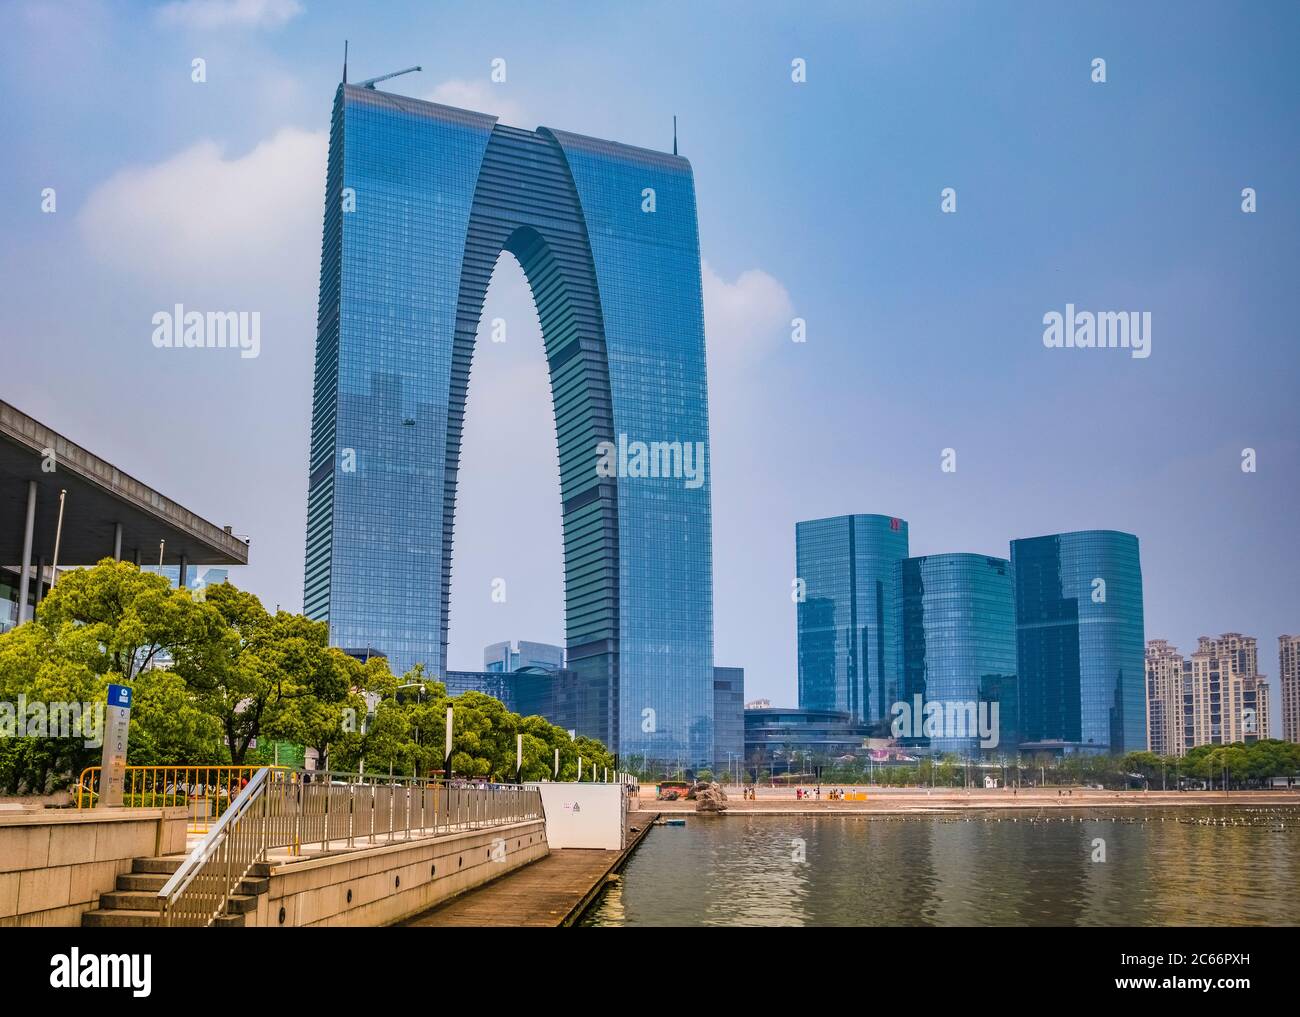 China, Suzhou city, Gate of the Orient Building Stock Photo